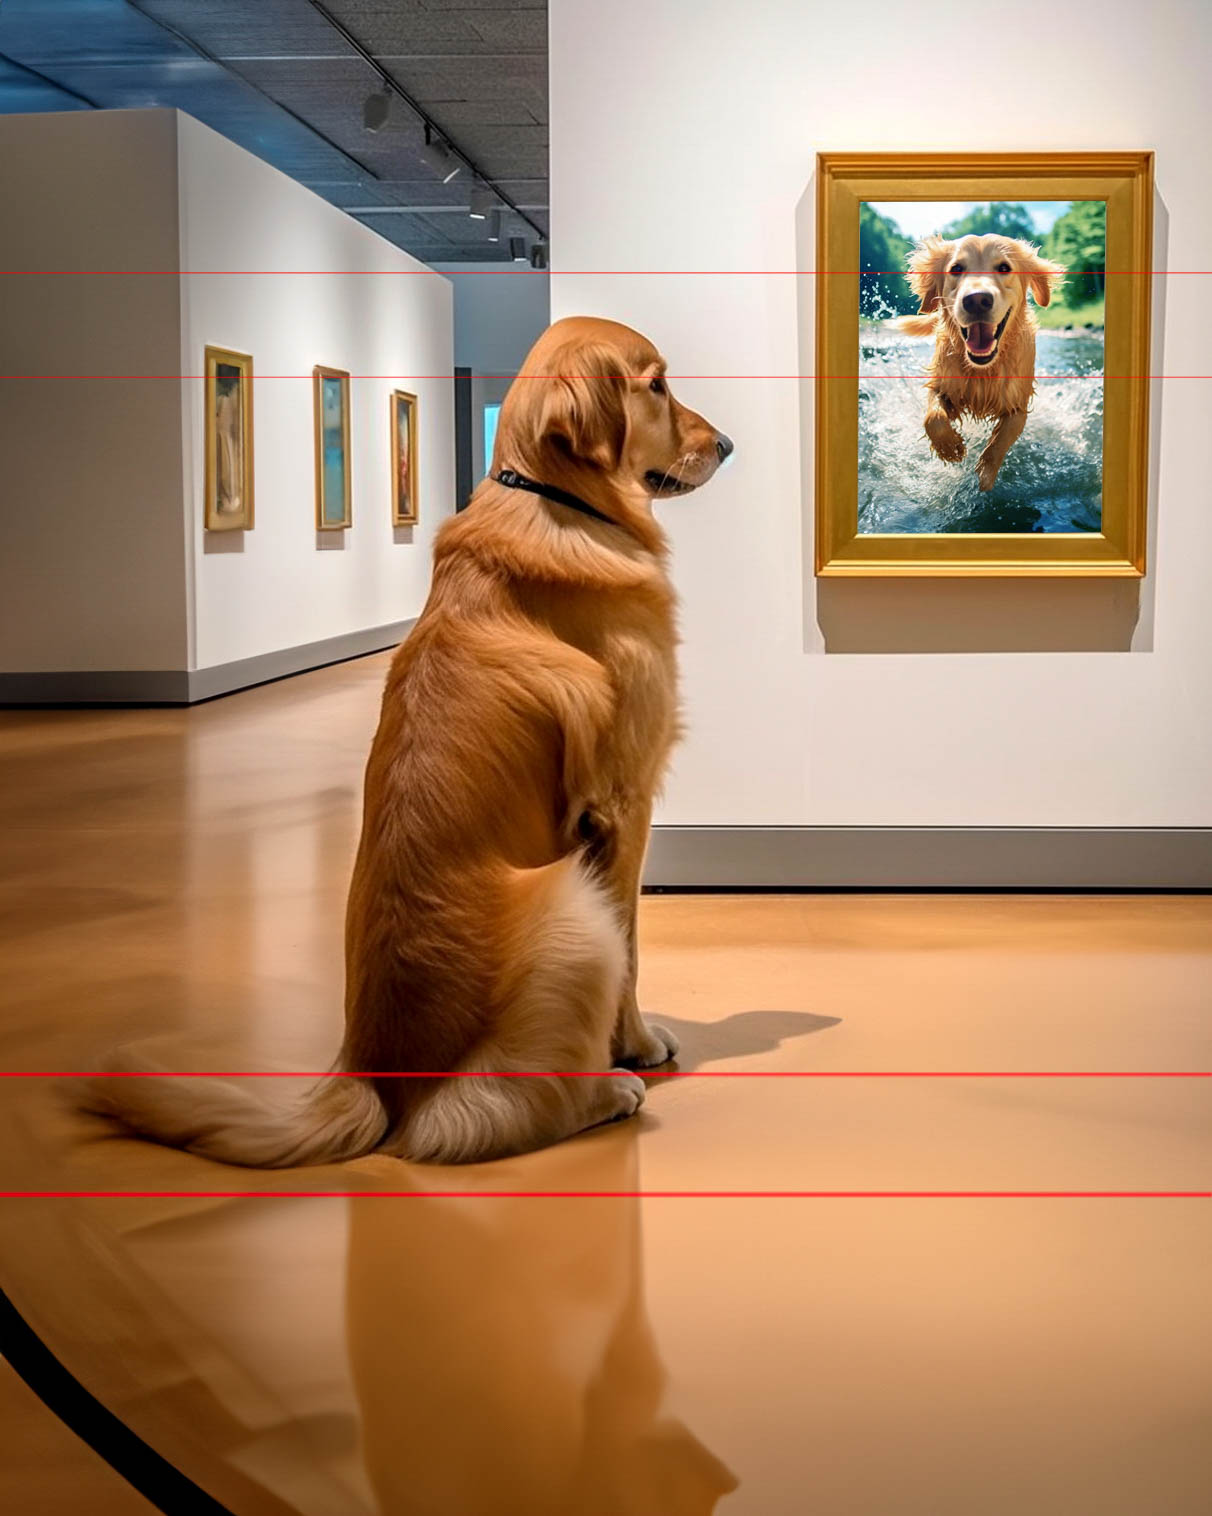 A Golden Retriever sits attentively in an art gallery, gazing at a framed picture of another Golden Retriever joyfully running through water. The gallery features other artworks and has a polished floor that reflects the dog's image.